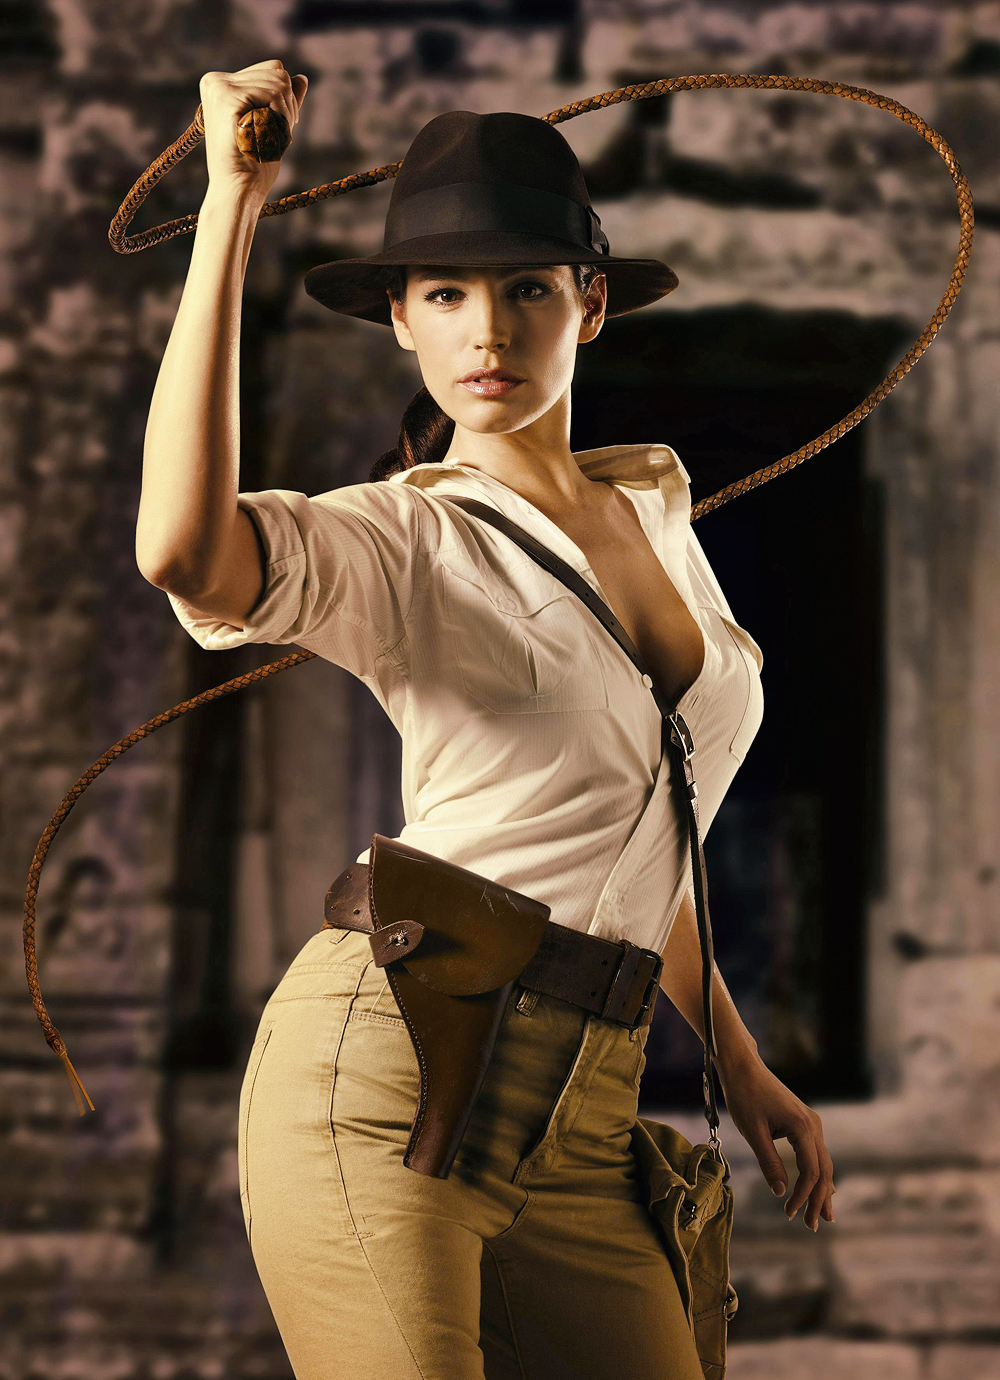 Whipping weekend - kelly brook as sexy indiana jones.